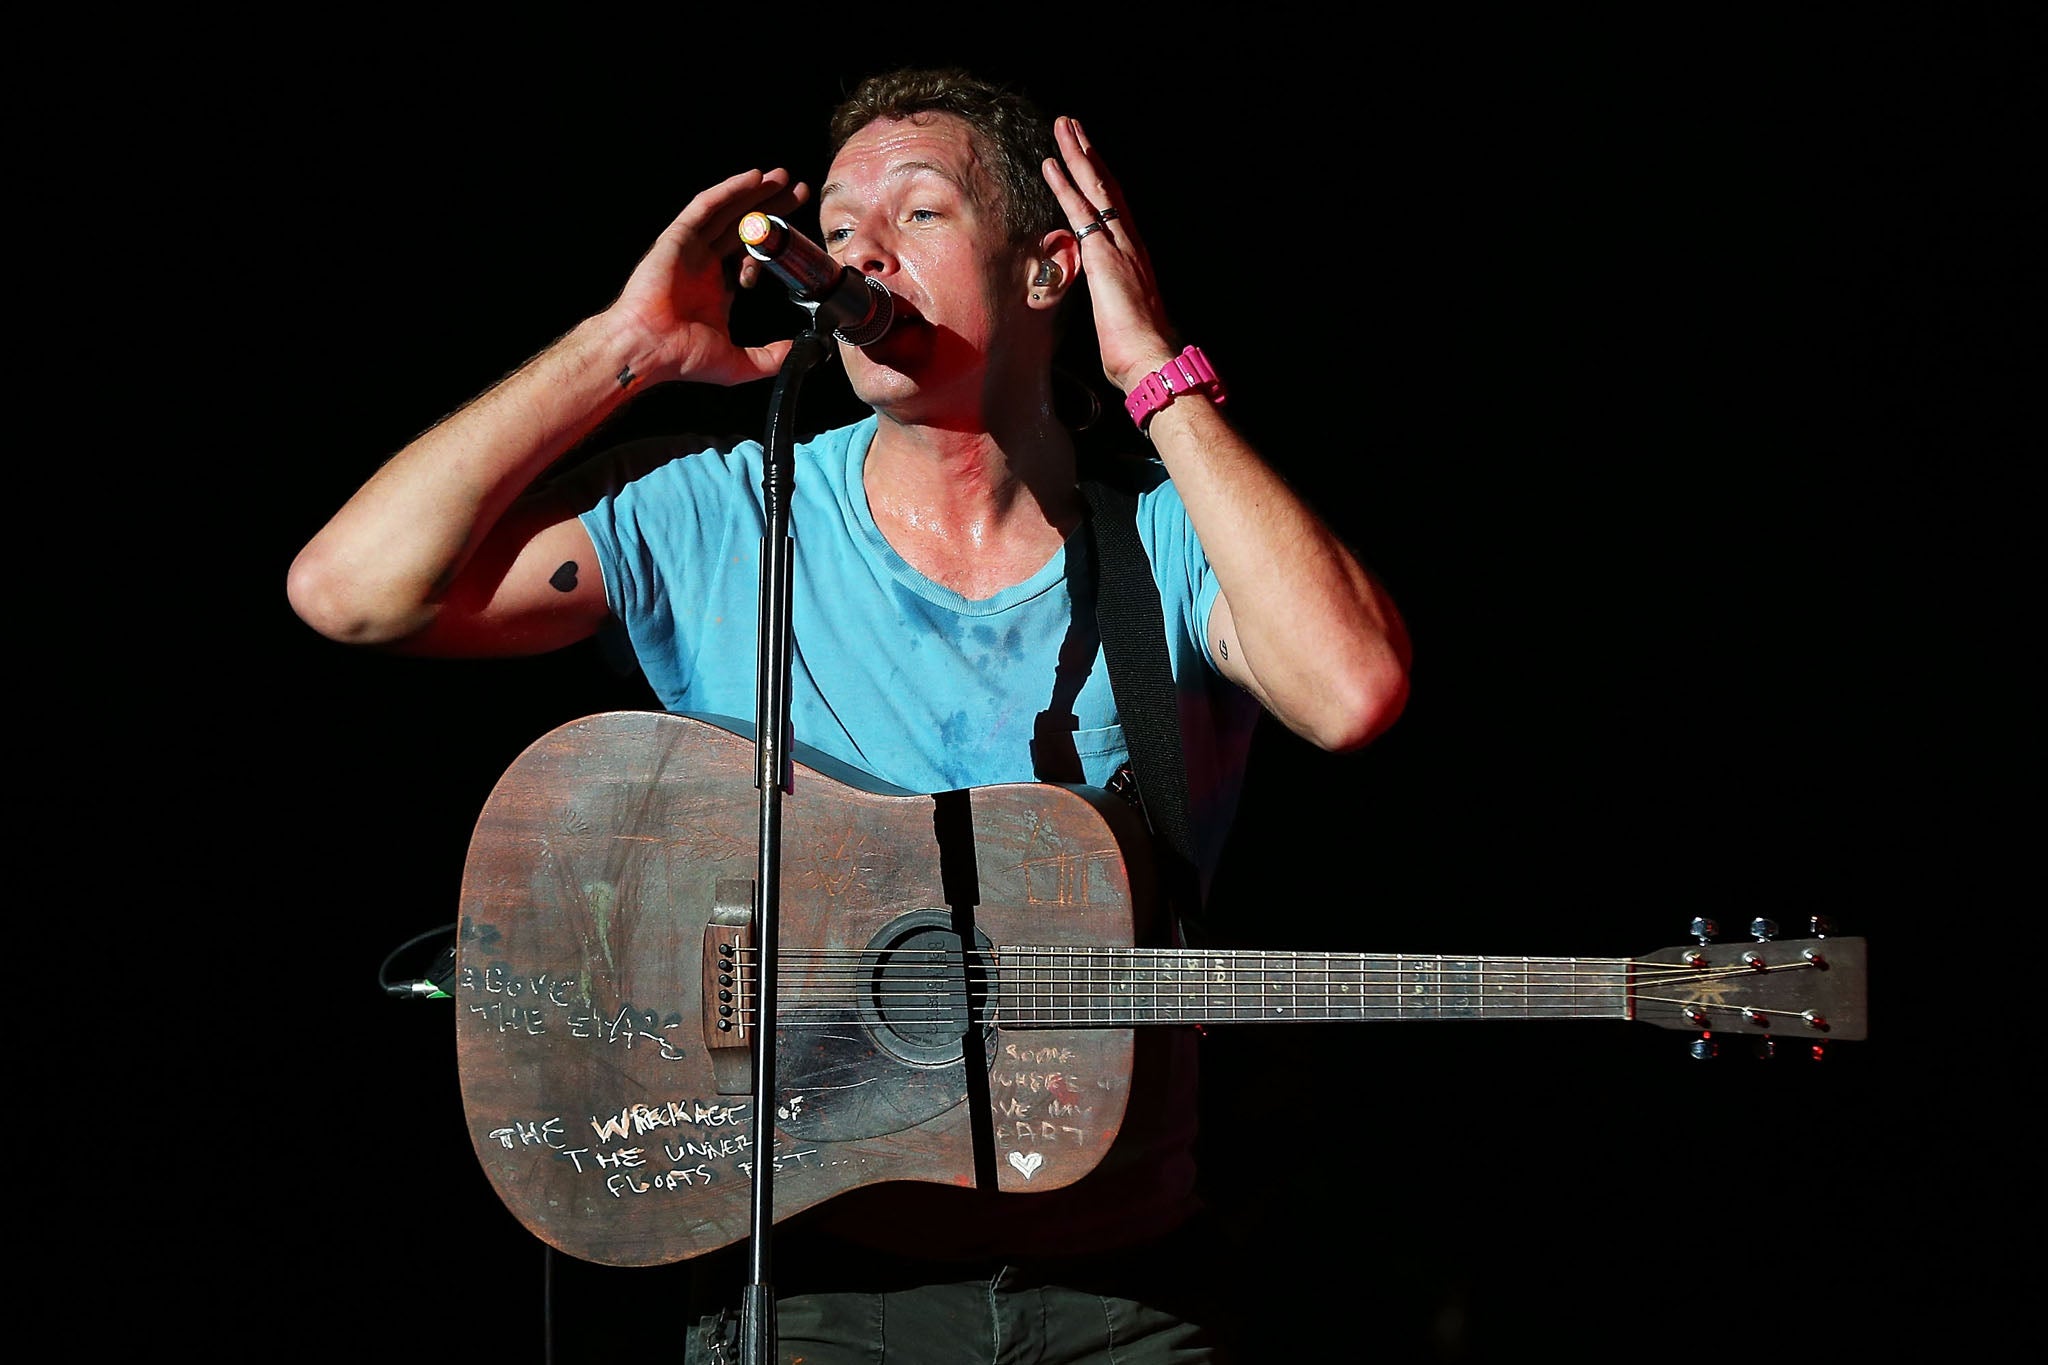 Coldplay's Chris Martin suffers from tinnitus